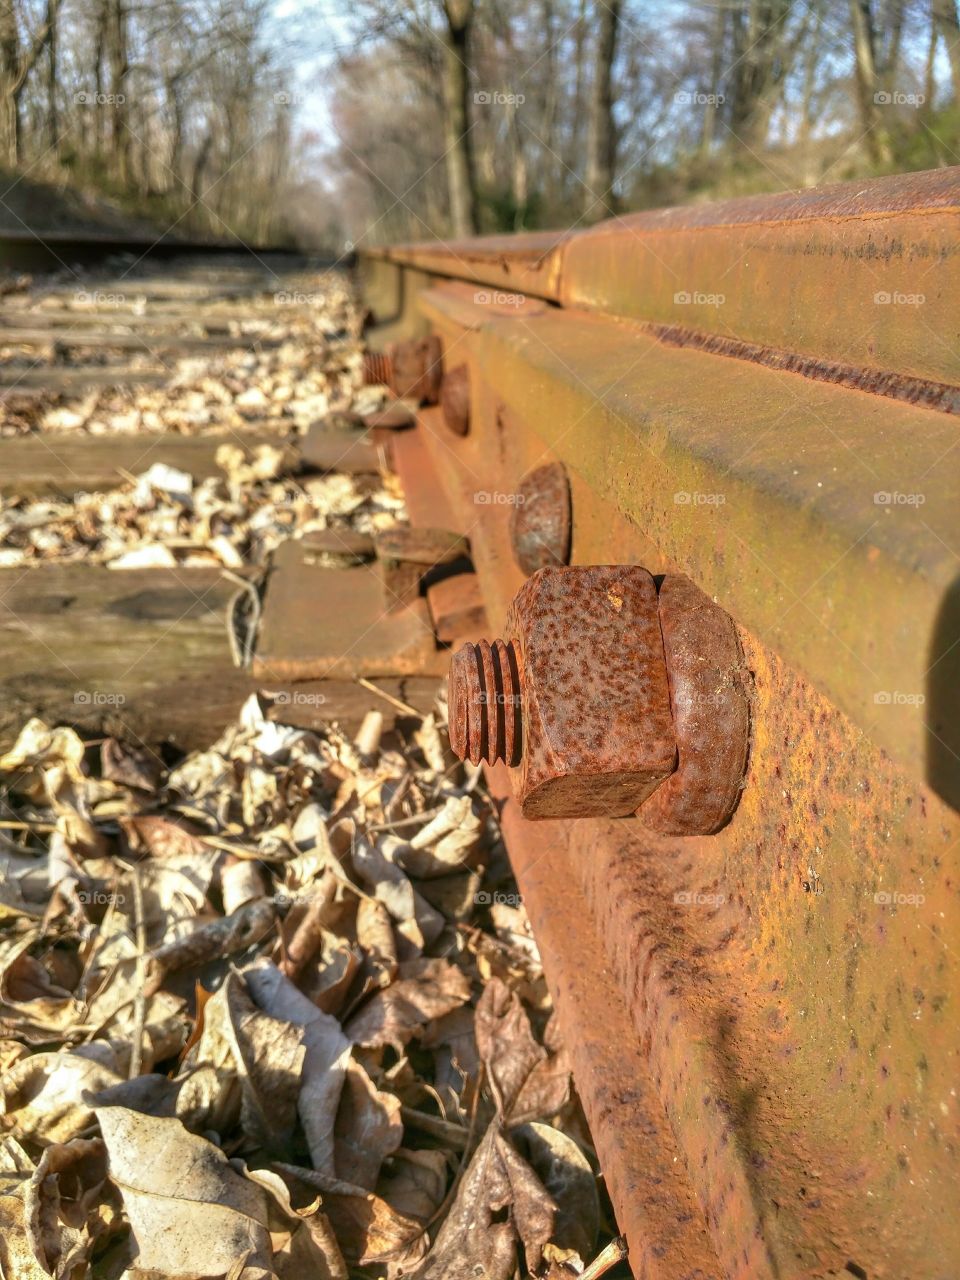 bolts and trains . just walking around